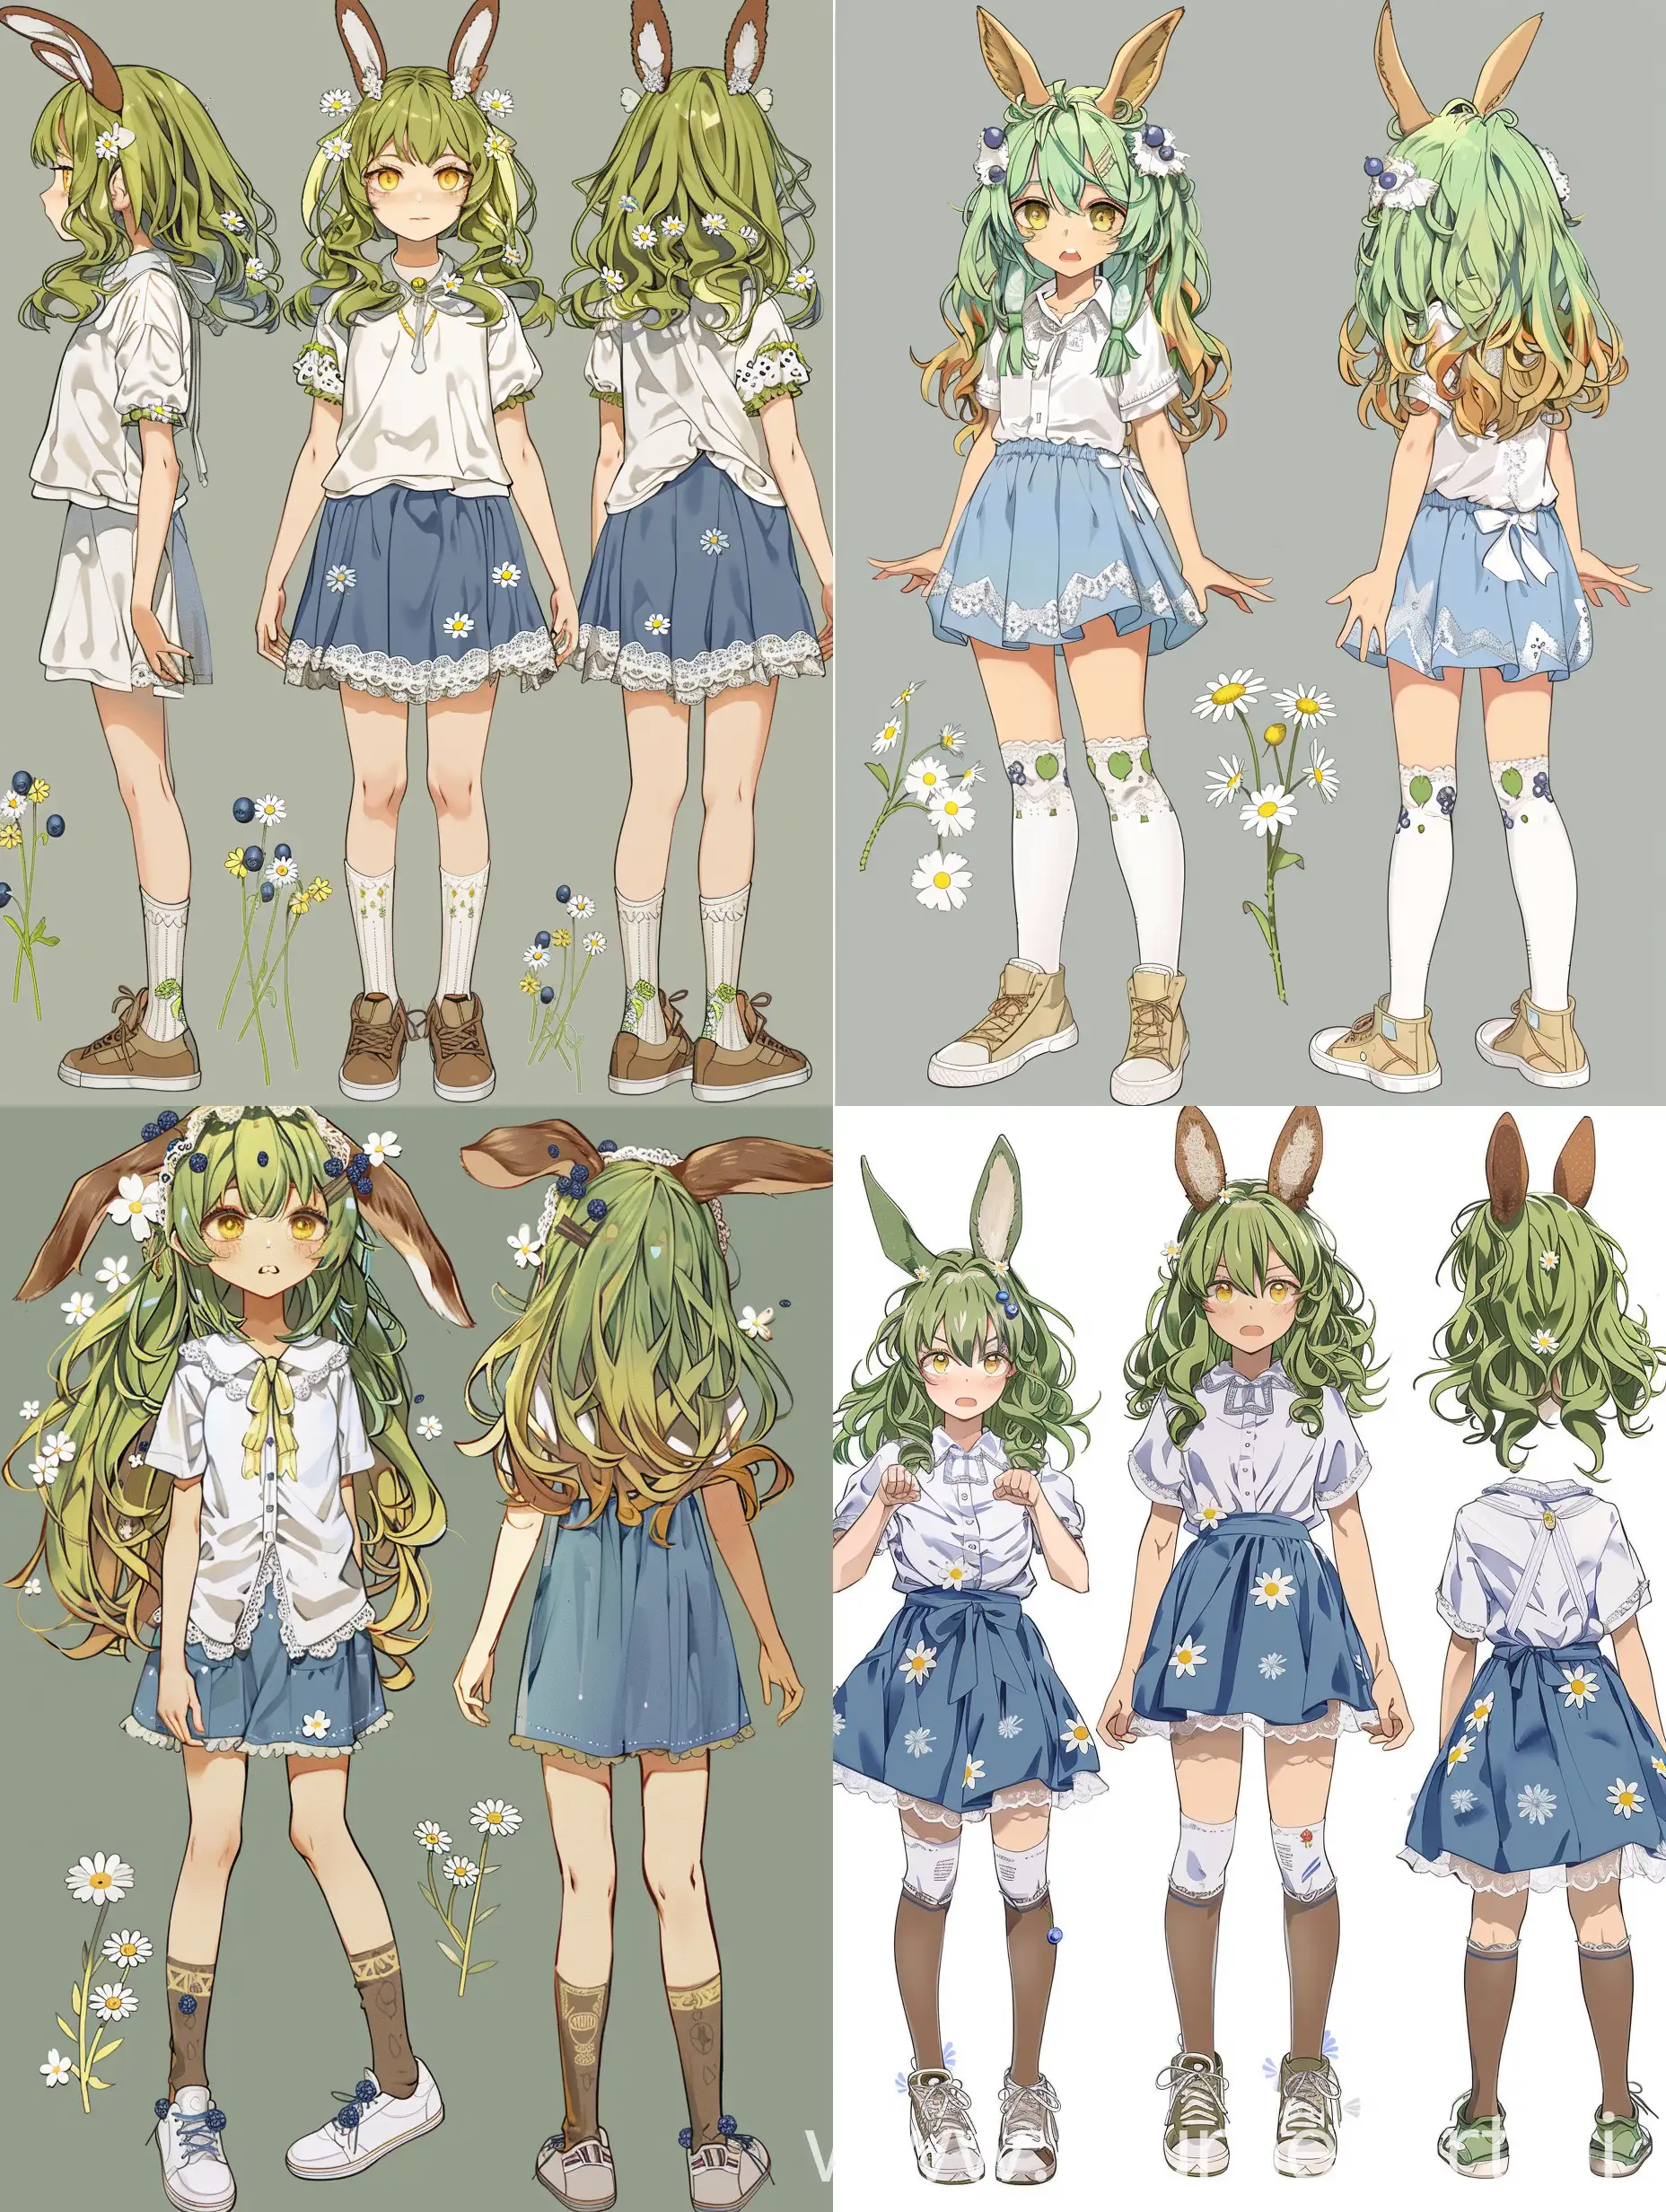 Full length girl, anime style, green wavy hair, brown bunny ears, yellow eyes, pale skin, white shirt with lace on the collar, blue knee-length sundress, knee-high socks, sneakers on her feet, daisies on clothes, blueberries on hair, multiple views.